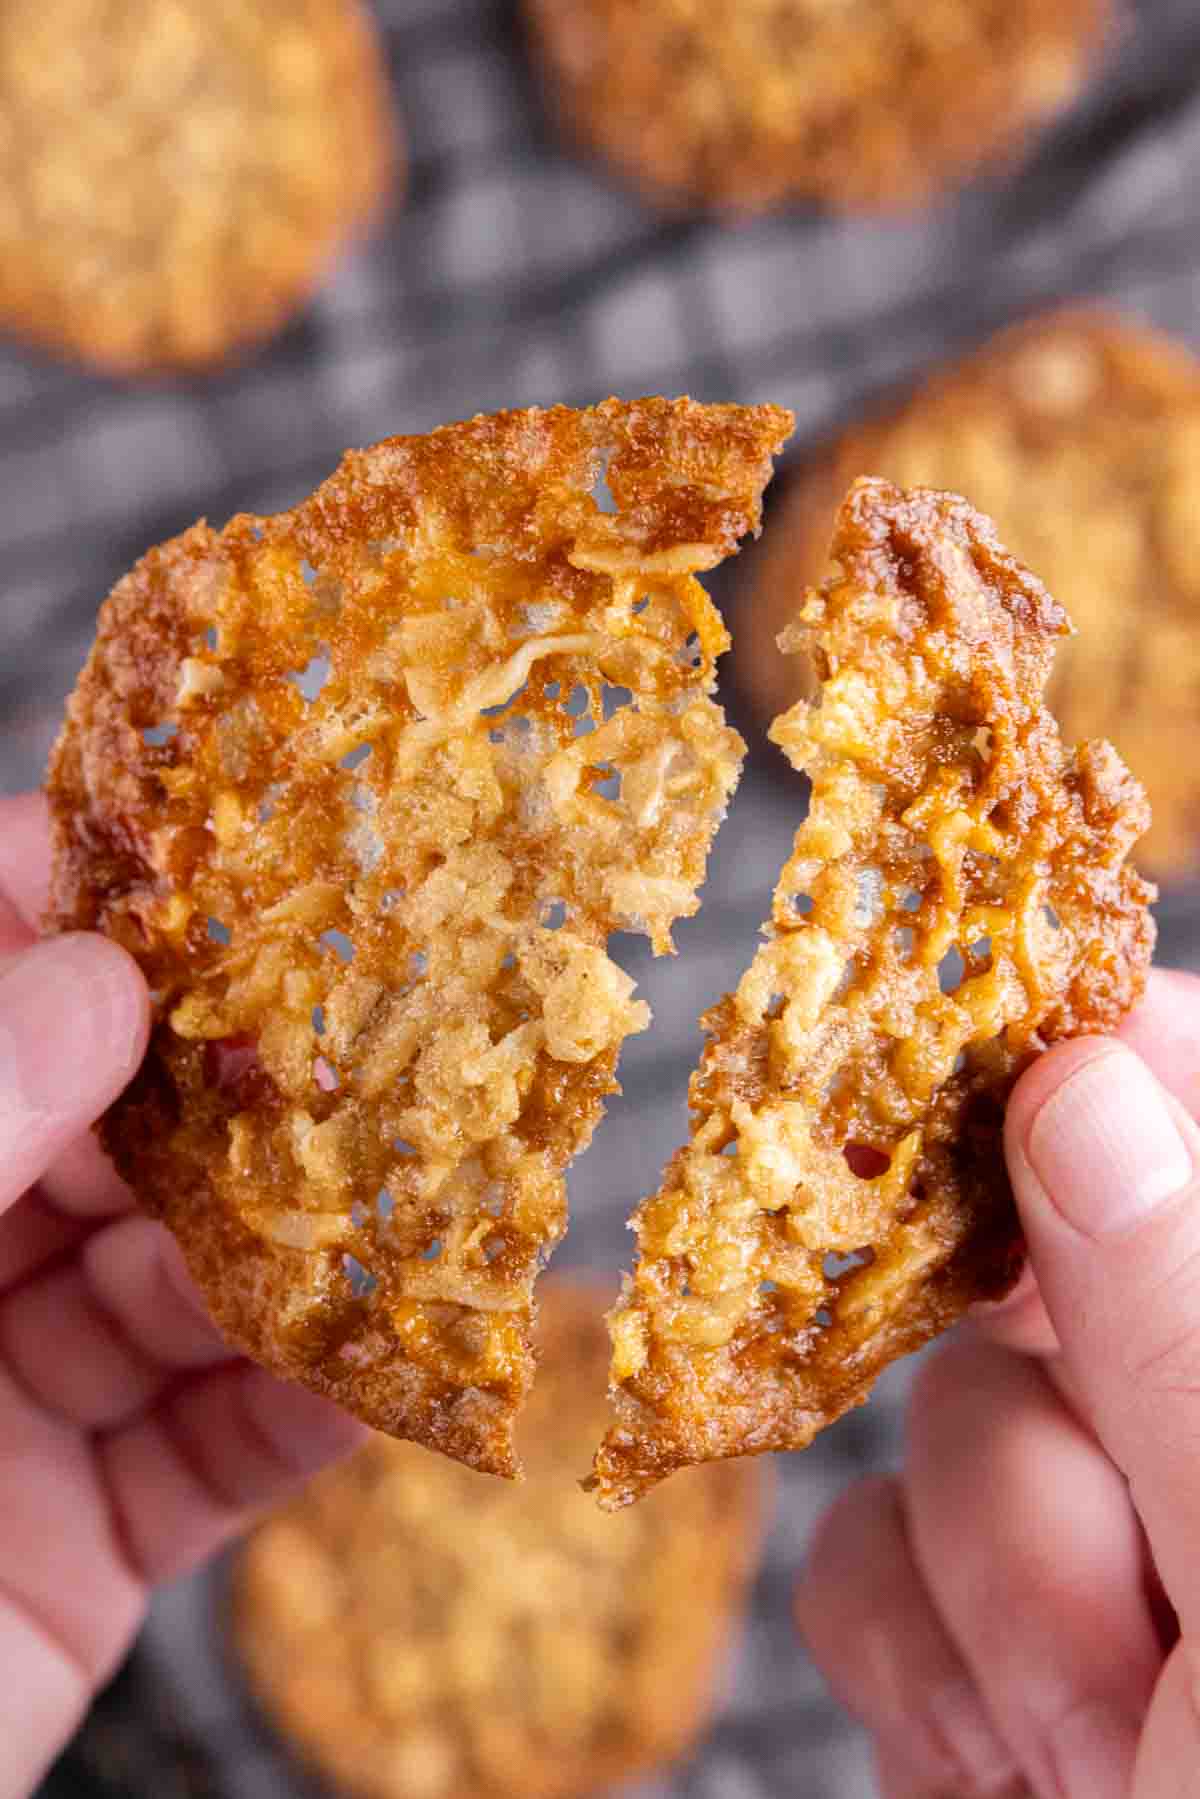 A person is holding a Crispy Coconut Cookies